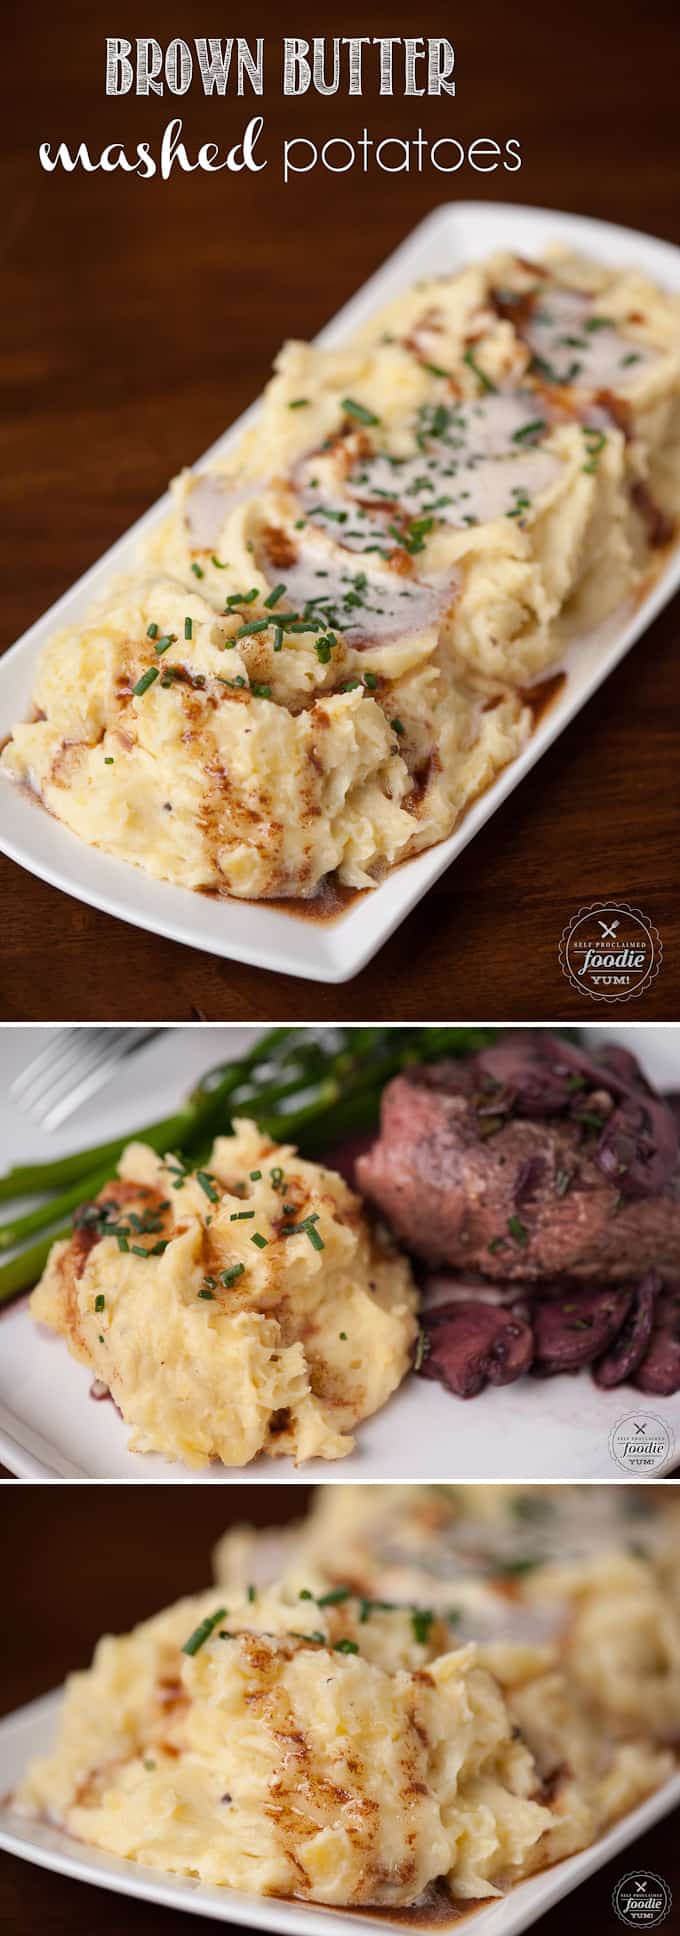 Brown Butter Mashed Potatoes | Self Proclaimed Foodie